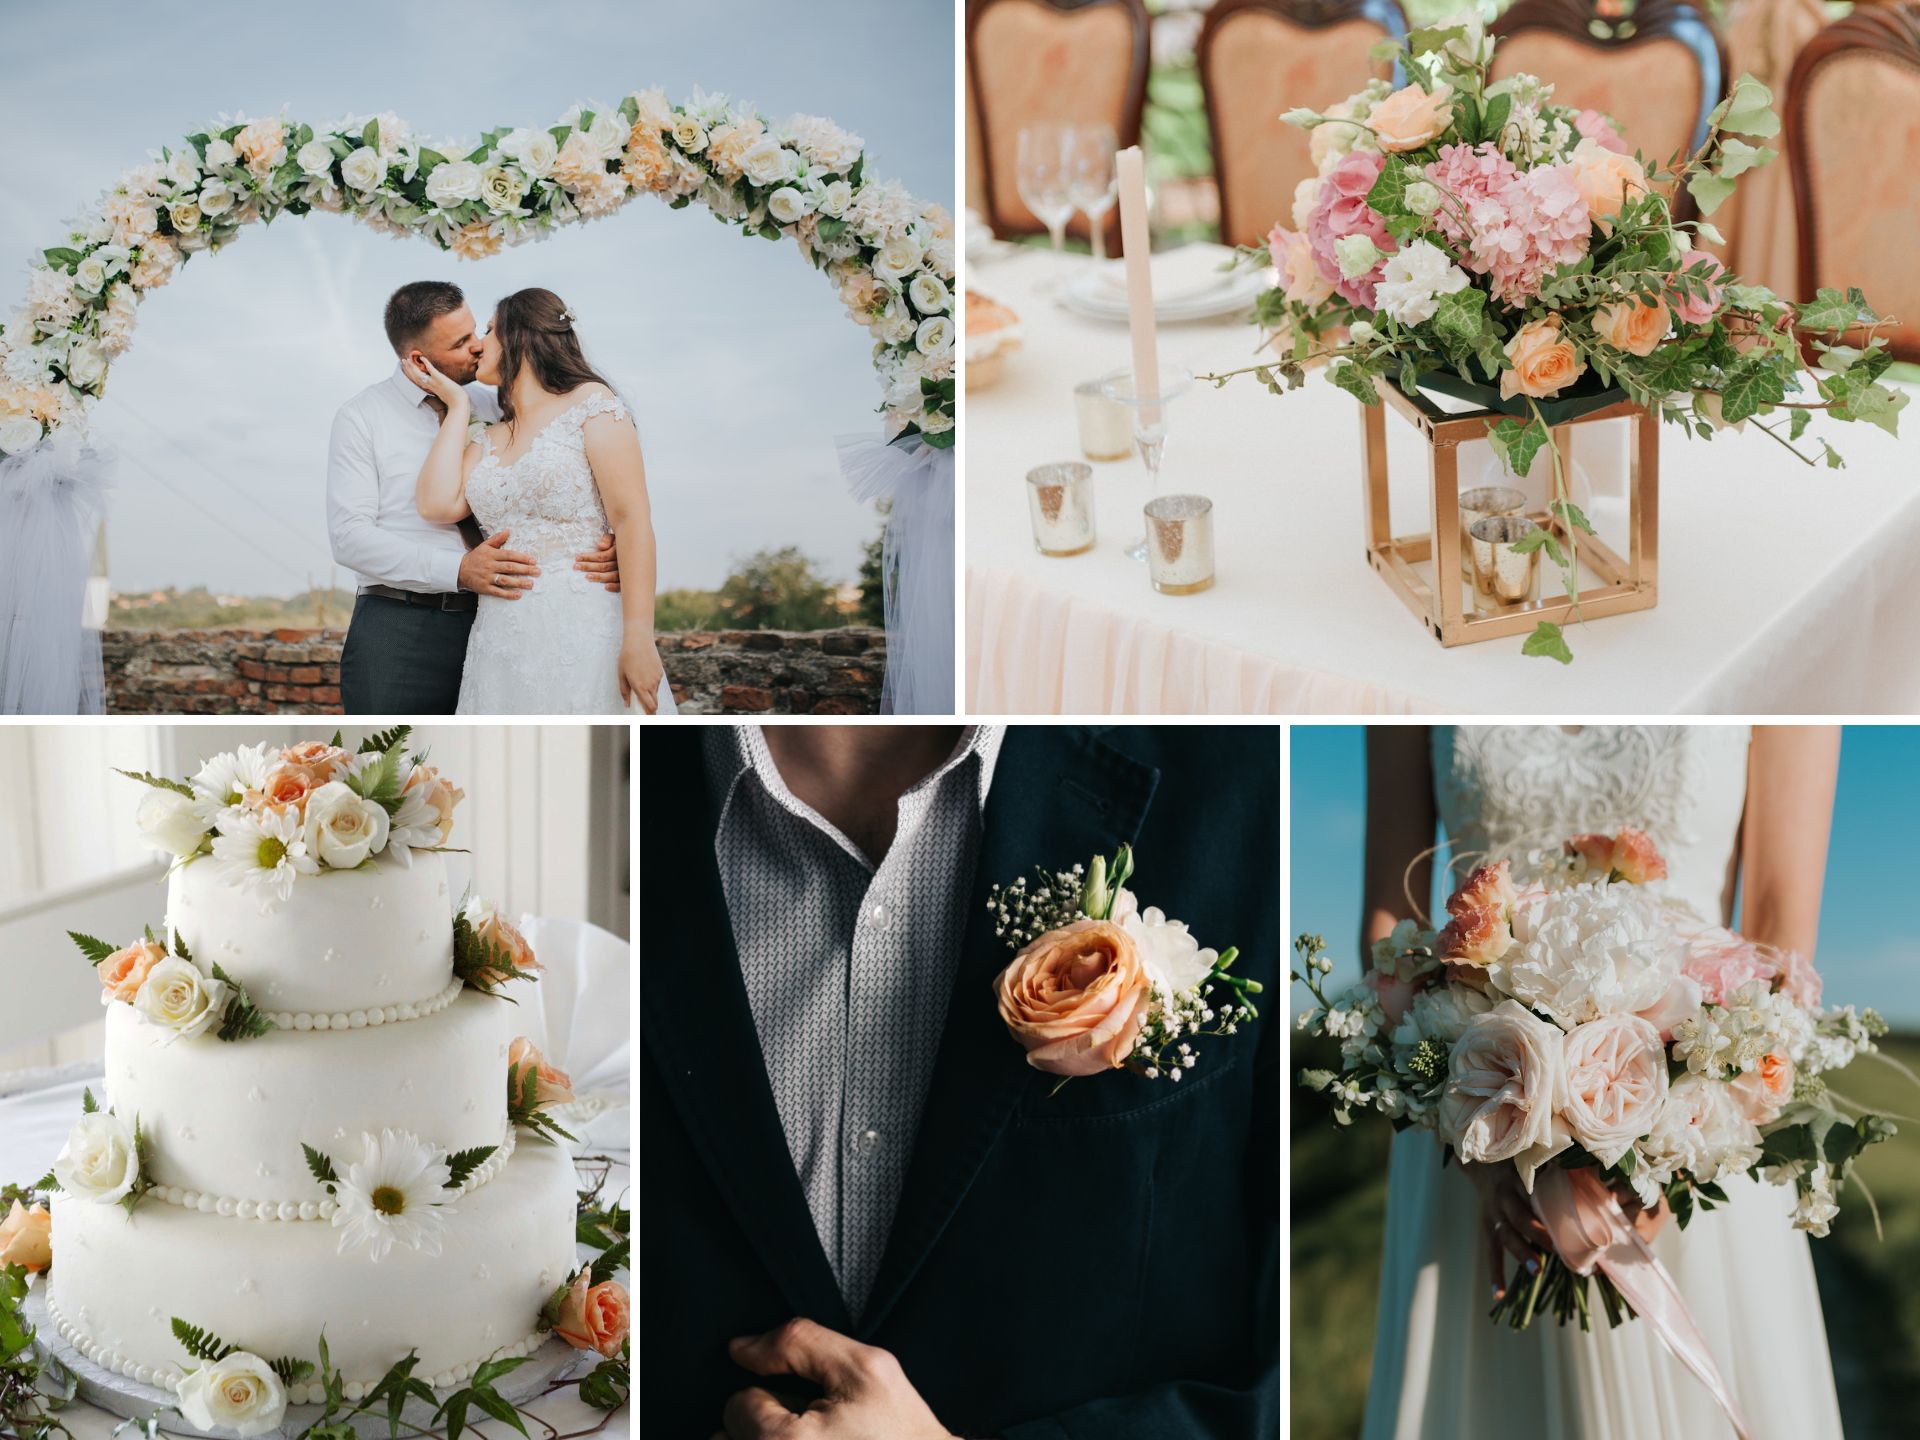 A photo collage with peach wedding color ideas.